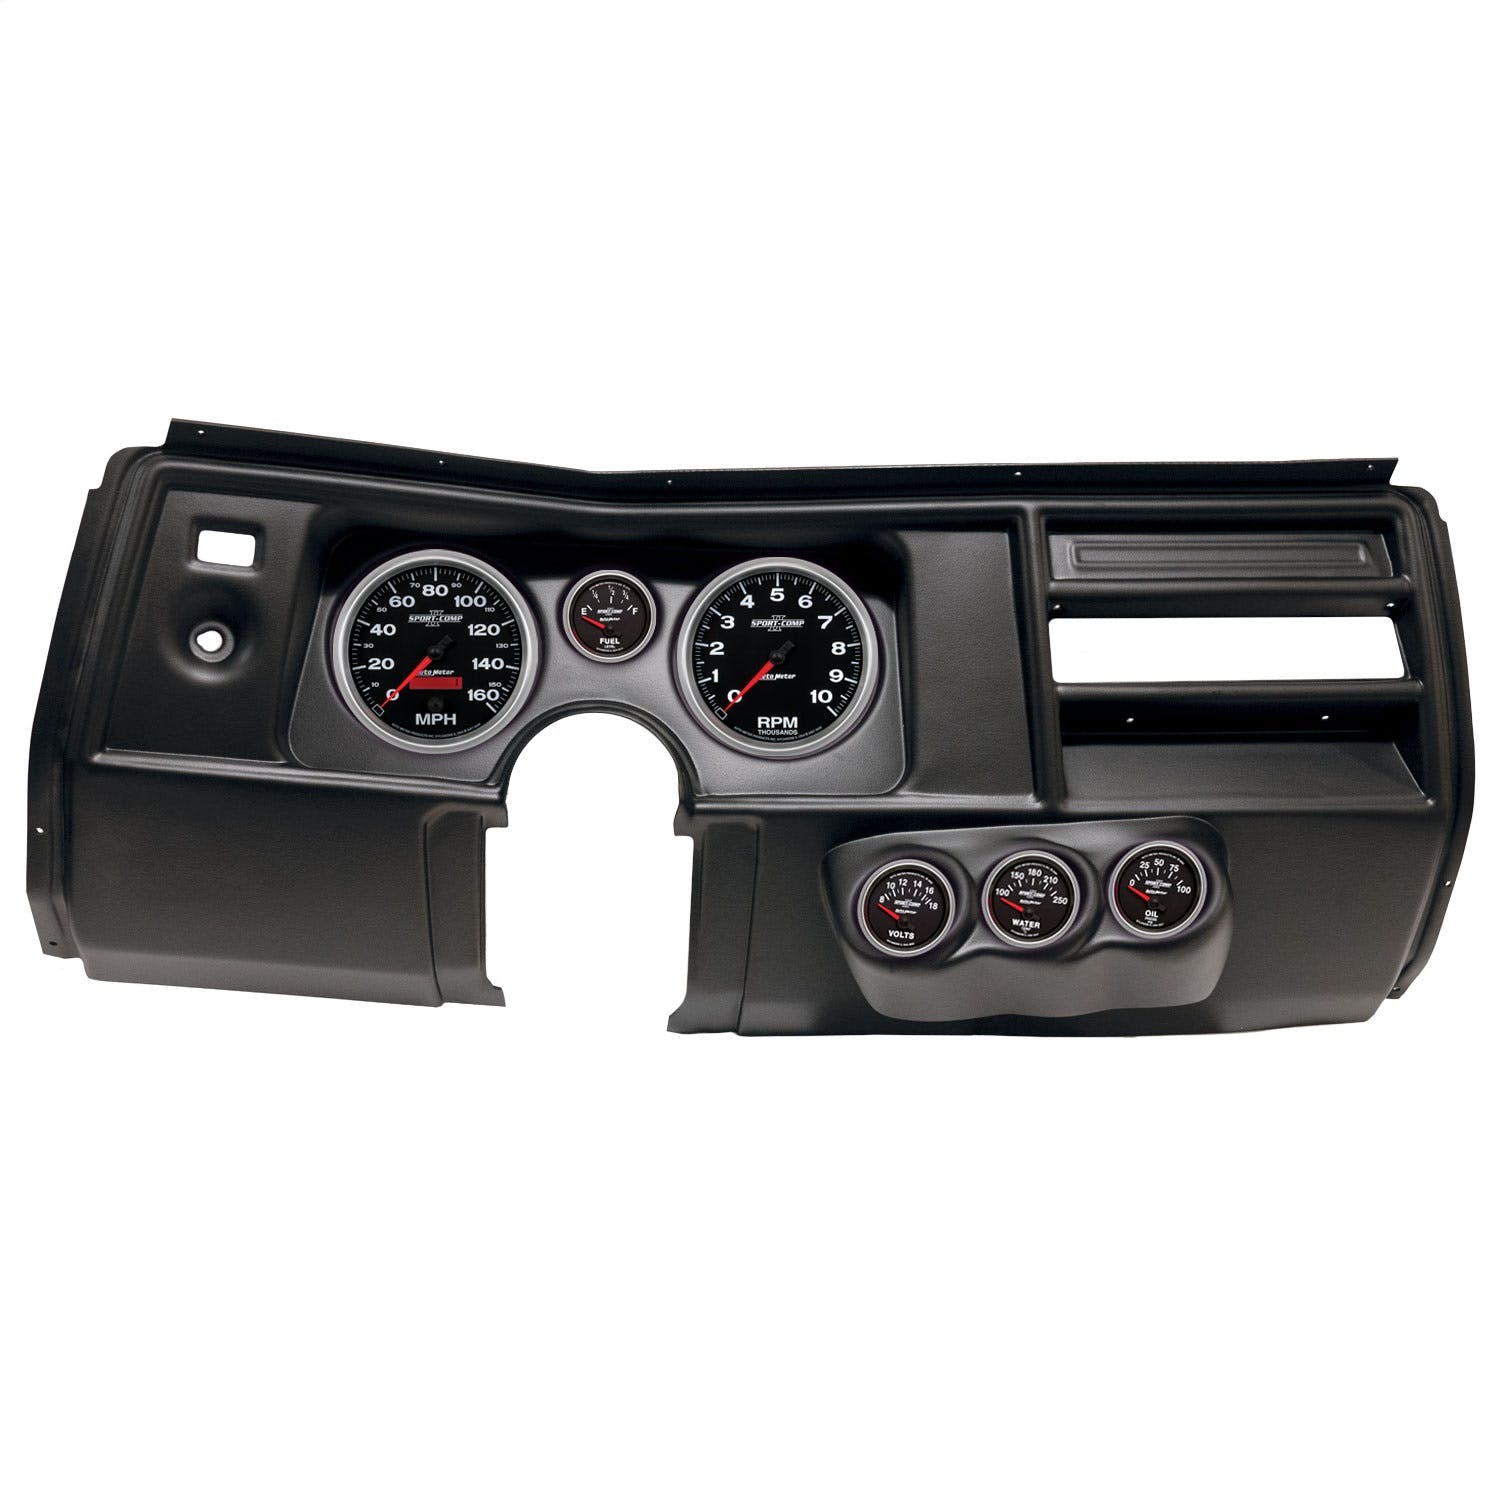 AutoMeter Products 2910-12 6 Gauge Direct-Fit Dash Kit, Chevy Chevelle No Vent 69, Sport-Comp II